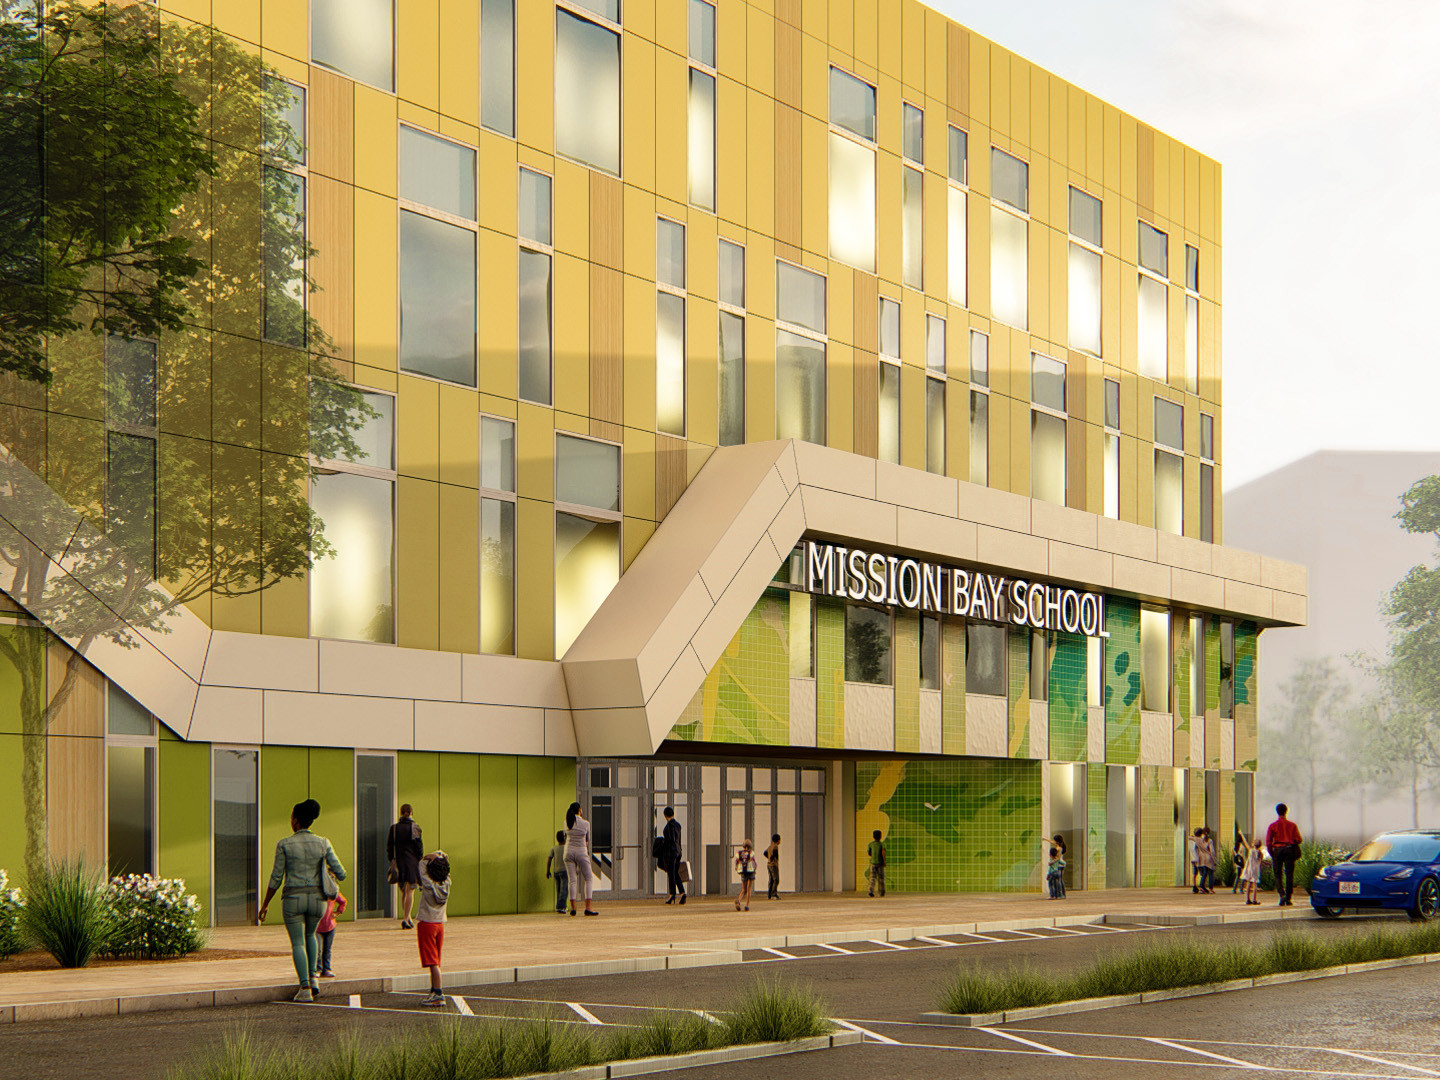 Rendering of Mission Bay School in San Francisco. 3 story building with covered entrance, green accents